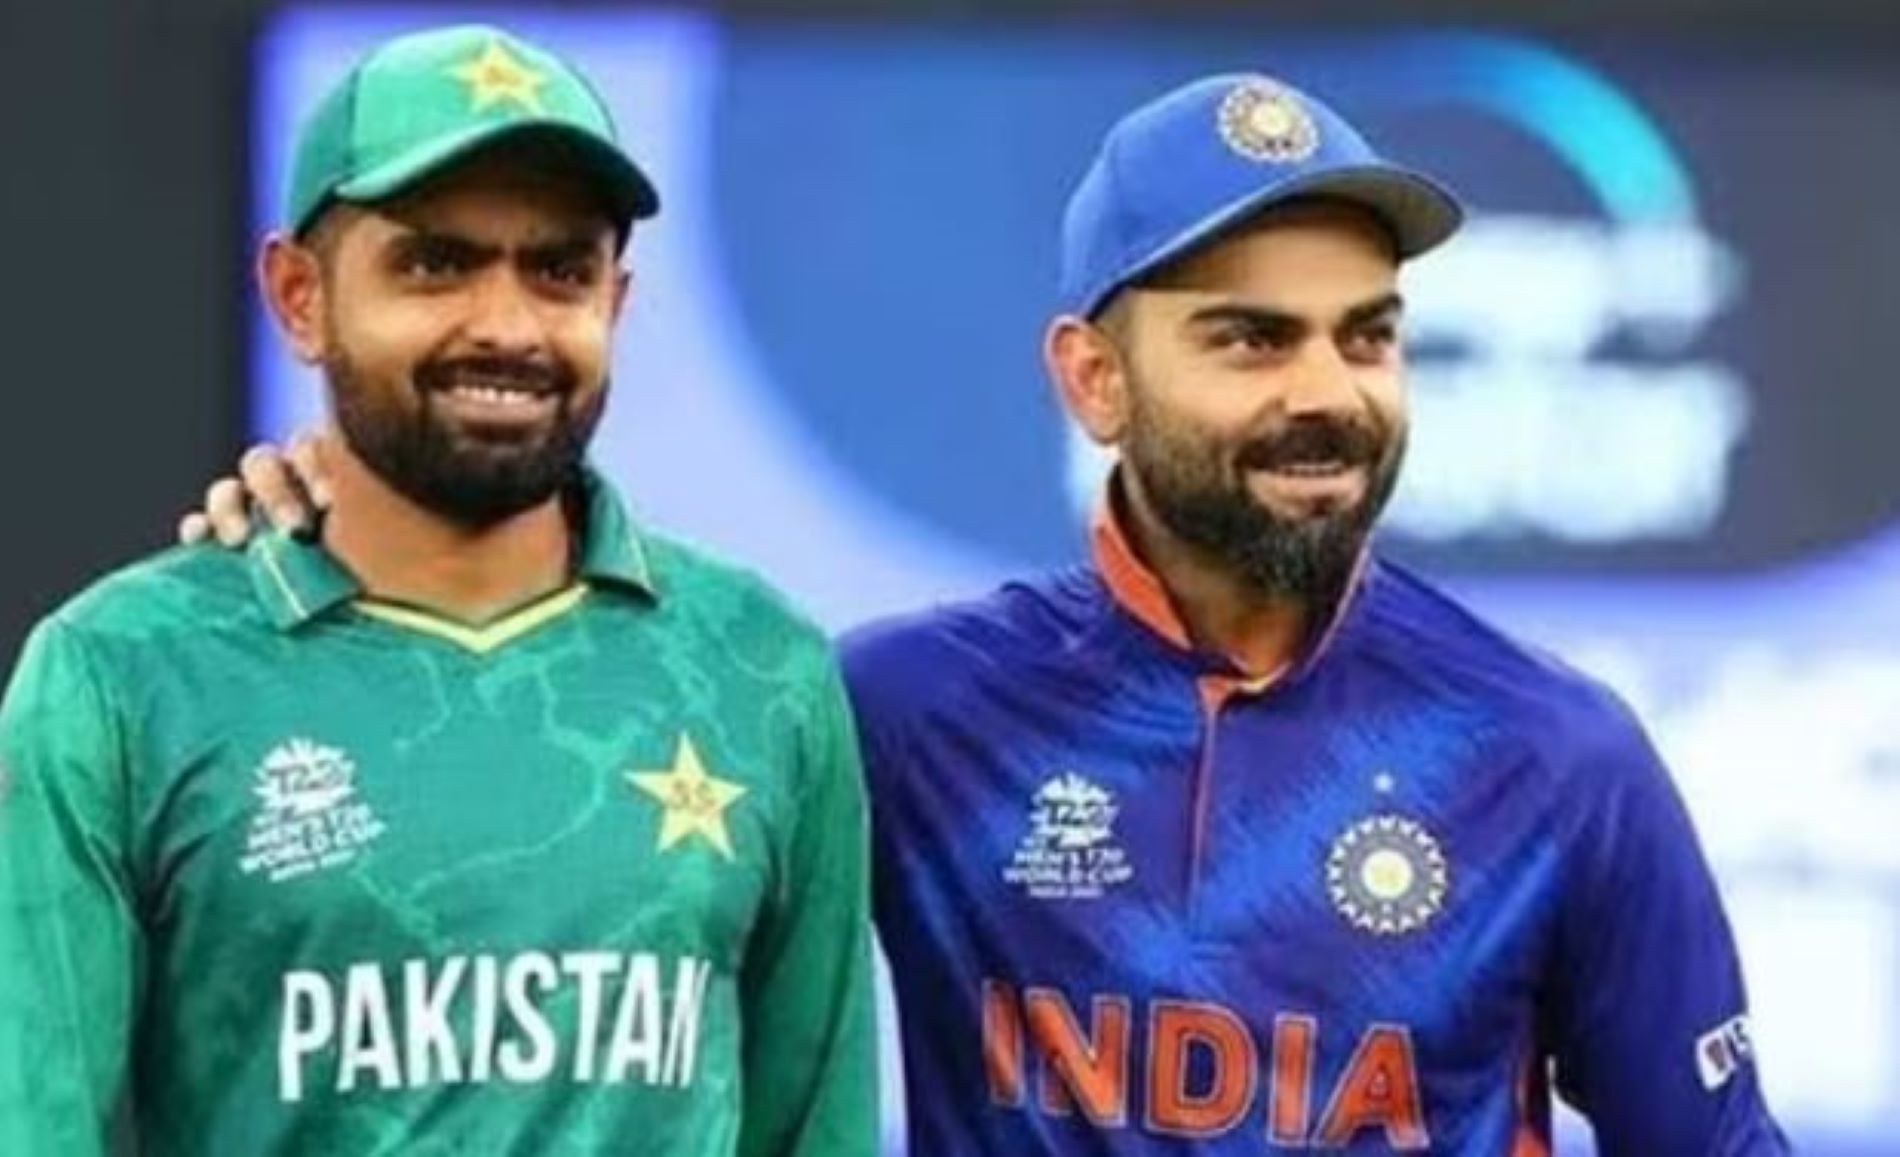 Virat Kohli and Babar Azam have had a healthy rivalry over the last few years.